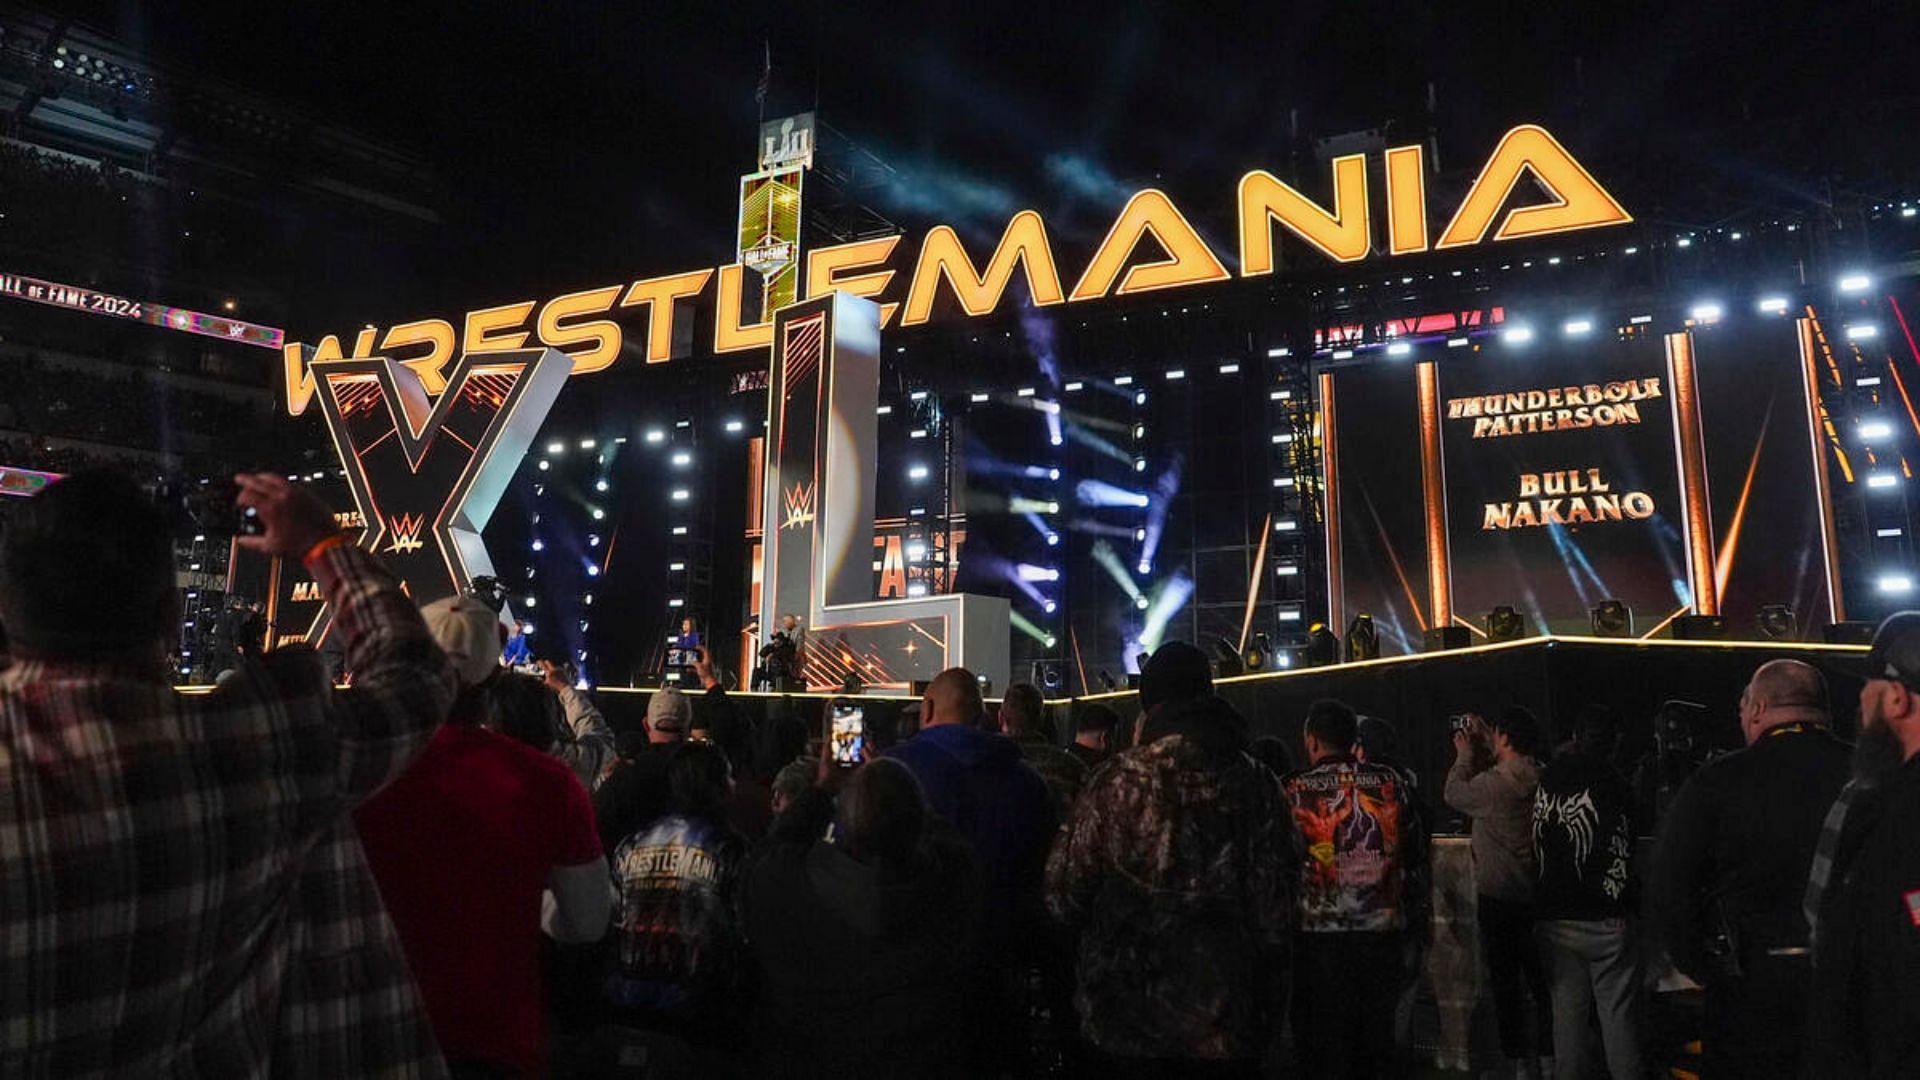 WWE Hall of Famers are honored every year at WrestleMania [Photo courtesy of WWE